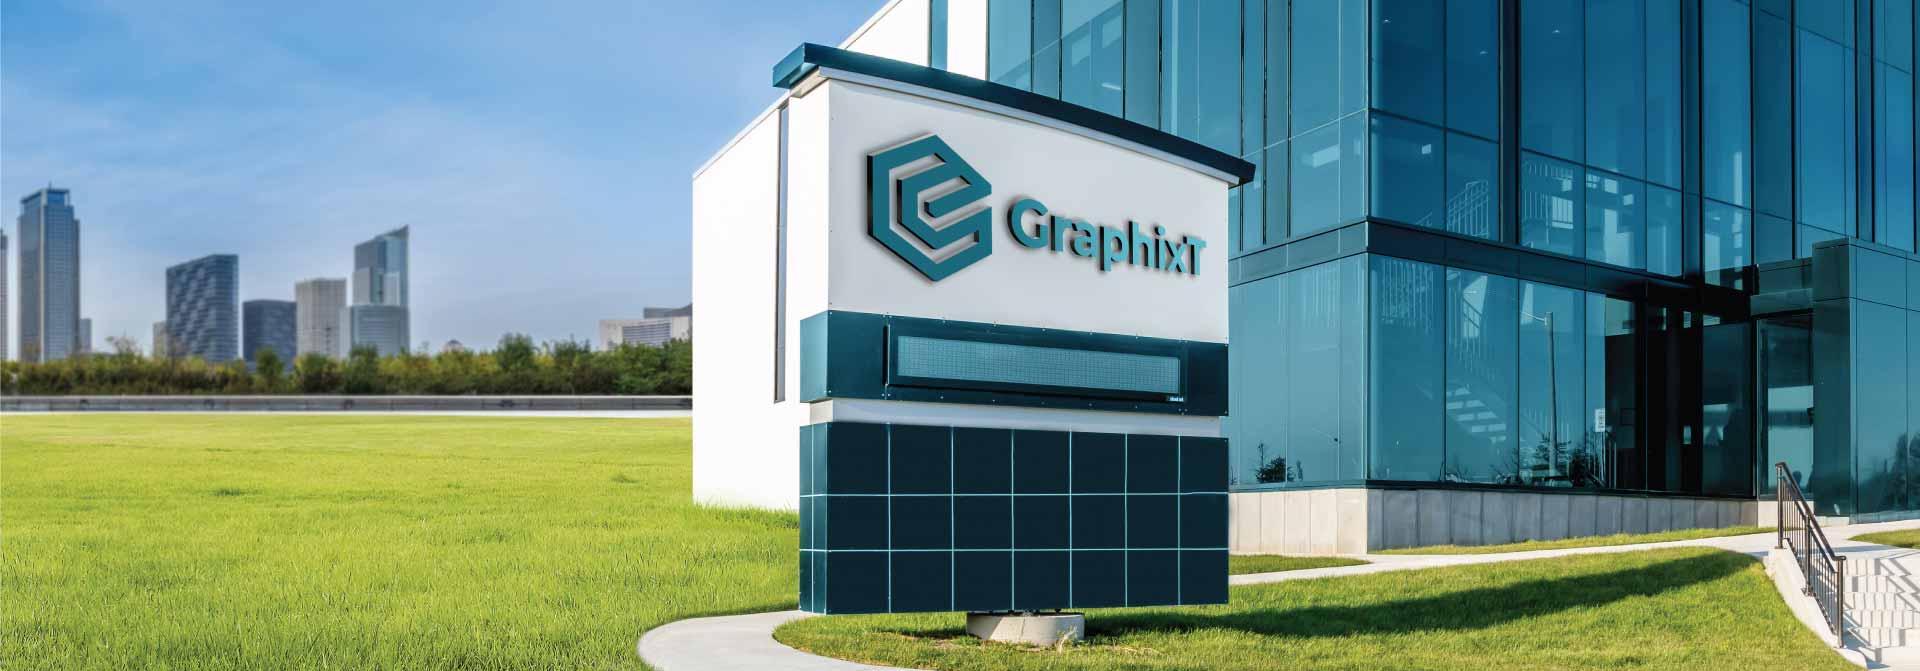 Graphixt business signage